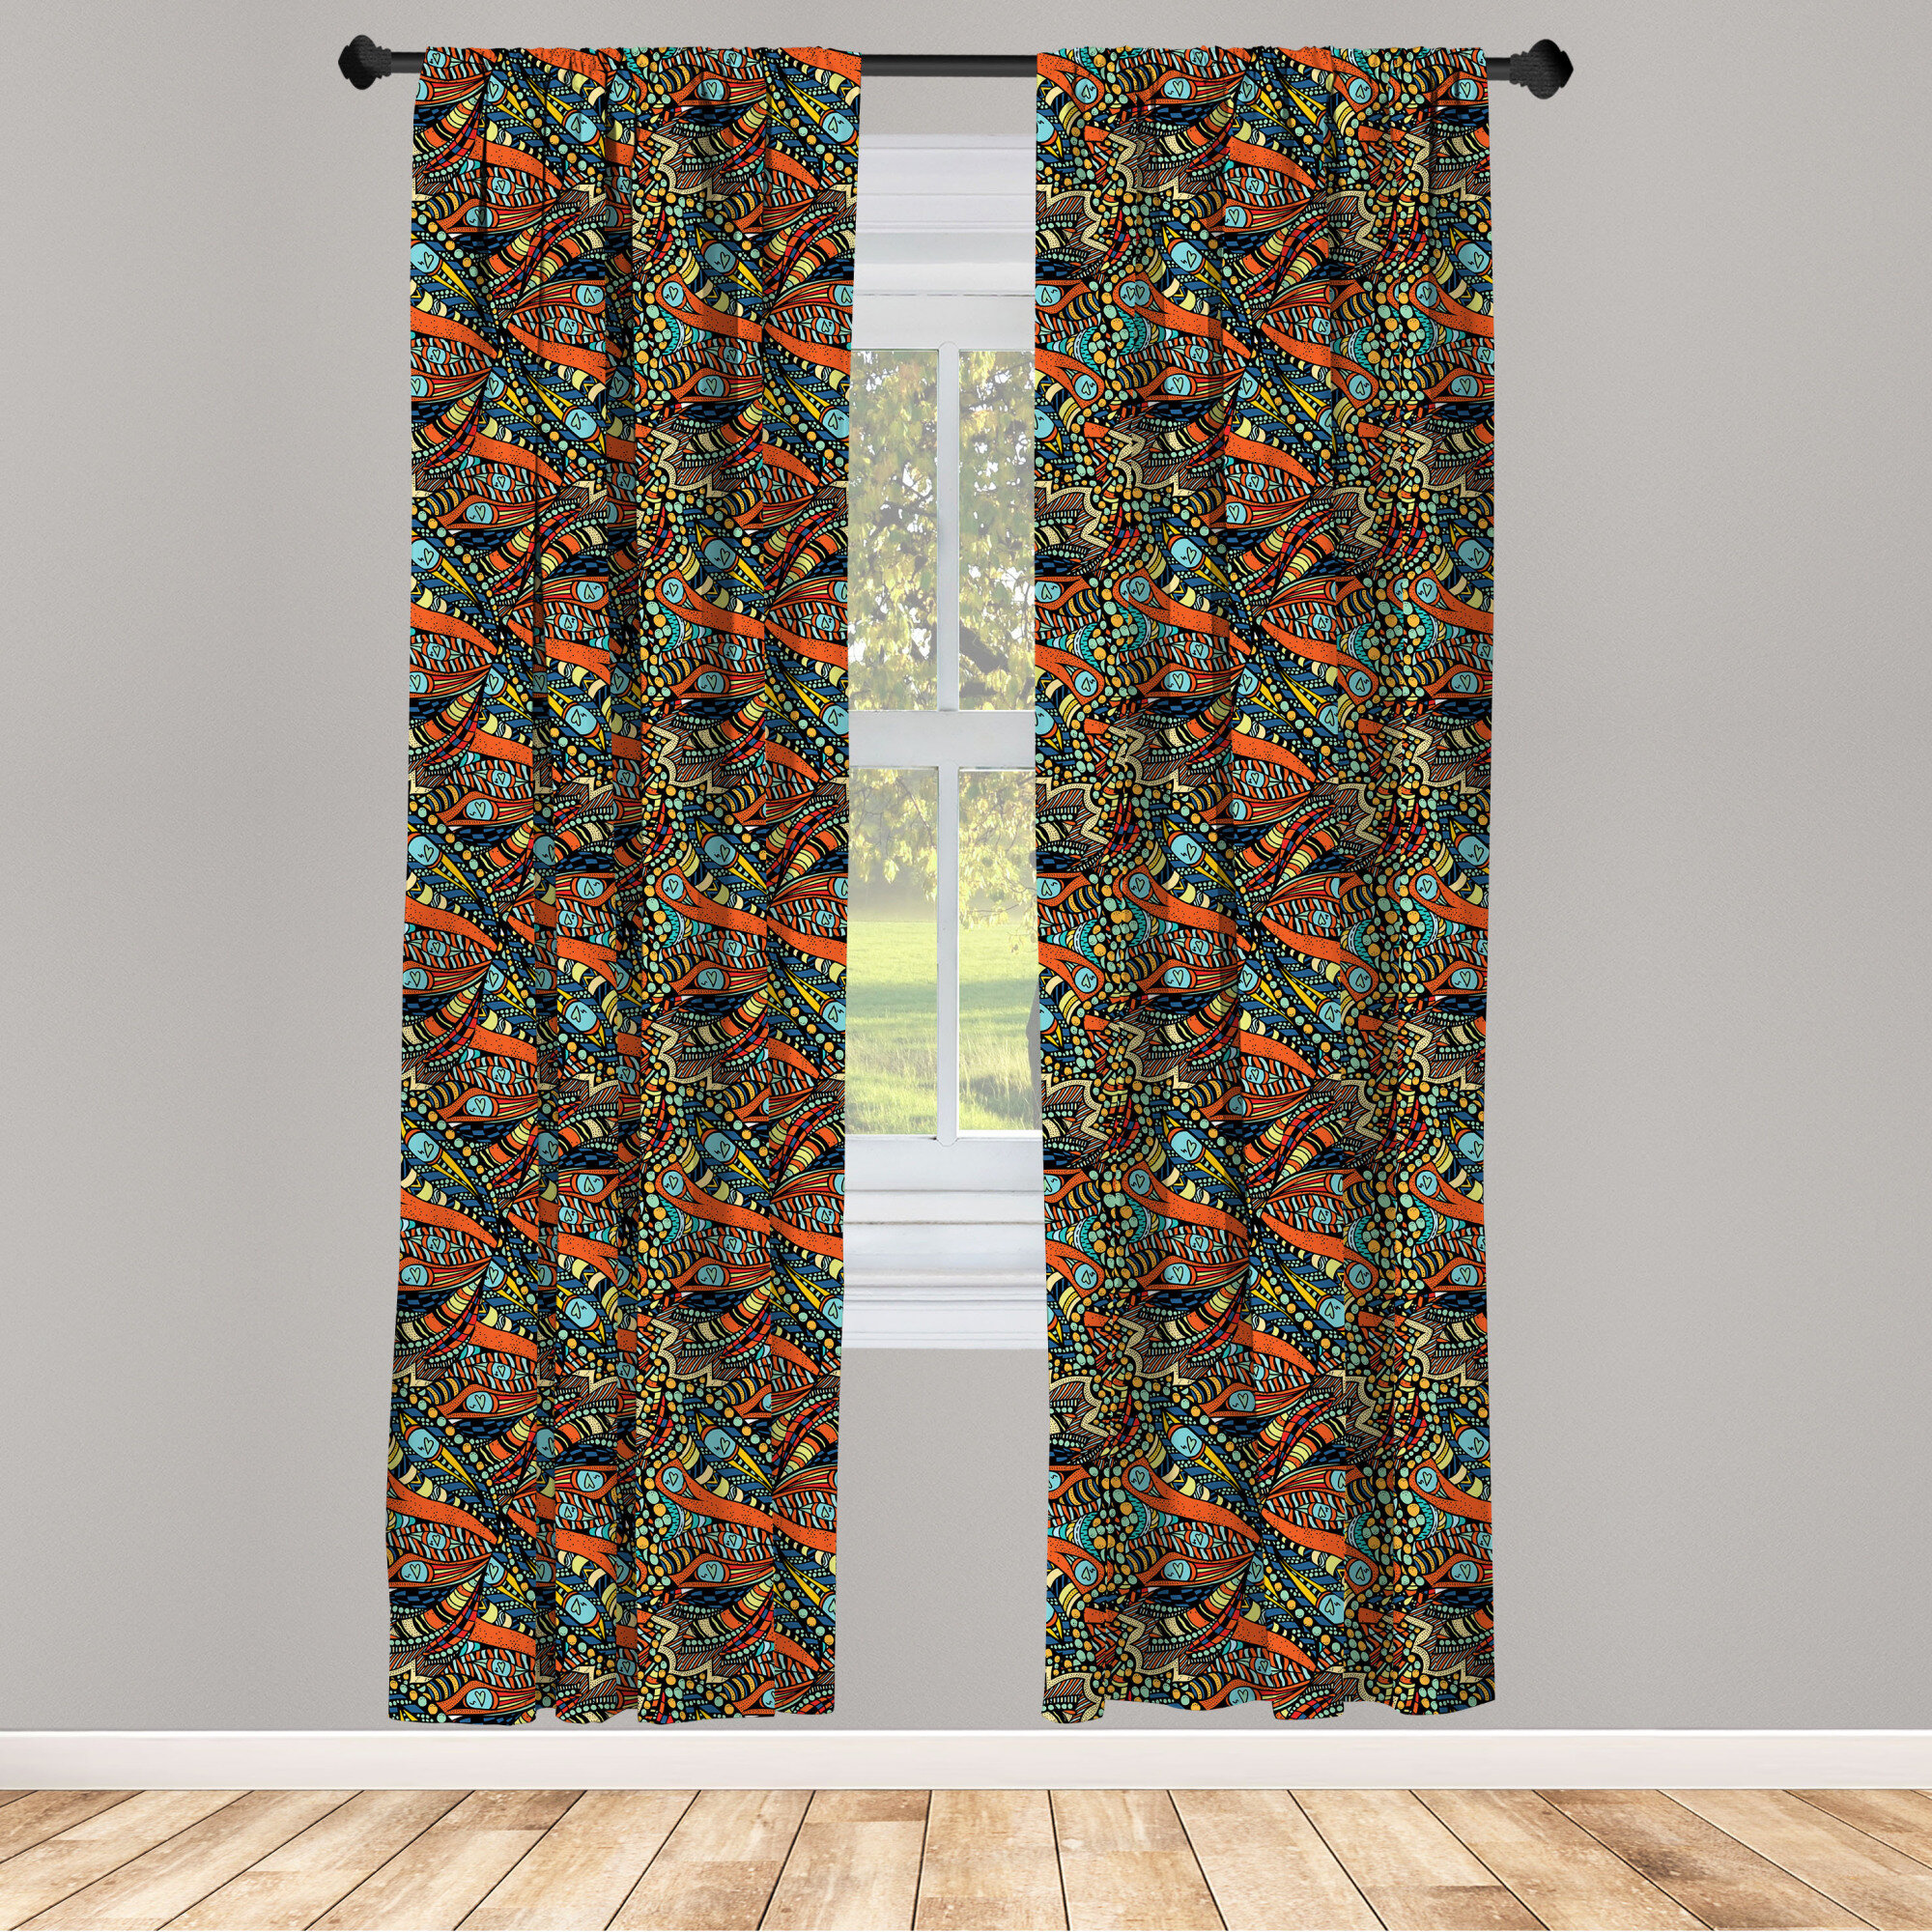 Ambesonne Decorative Printed 2 Panel Set Curtains Window Drapes for Home Decor 